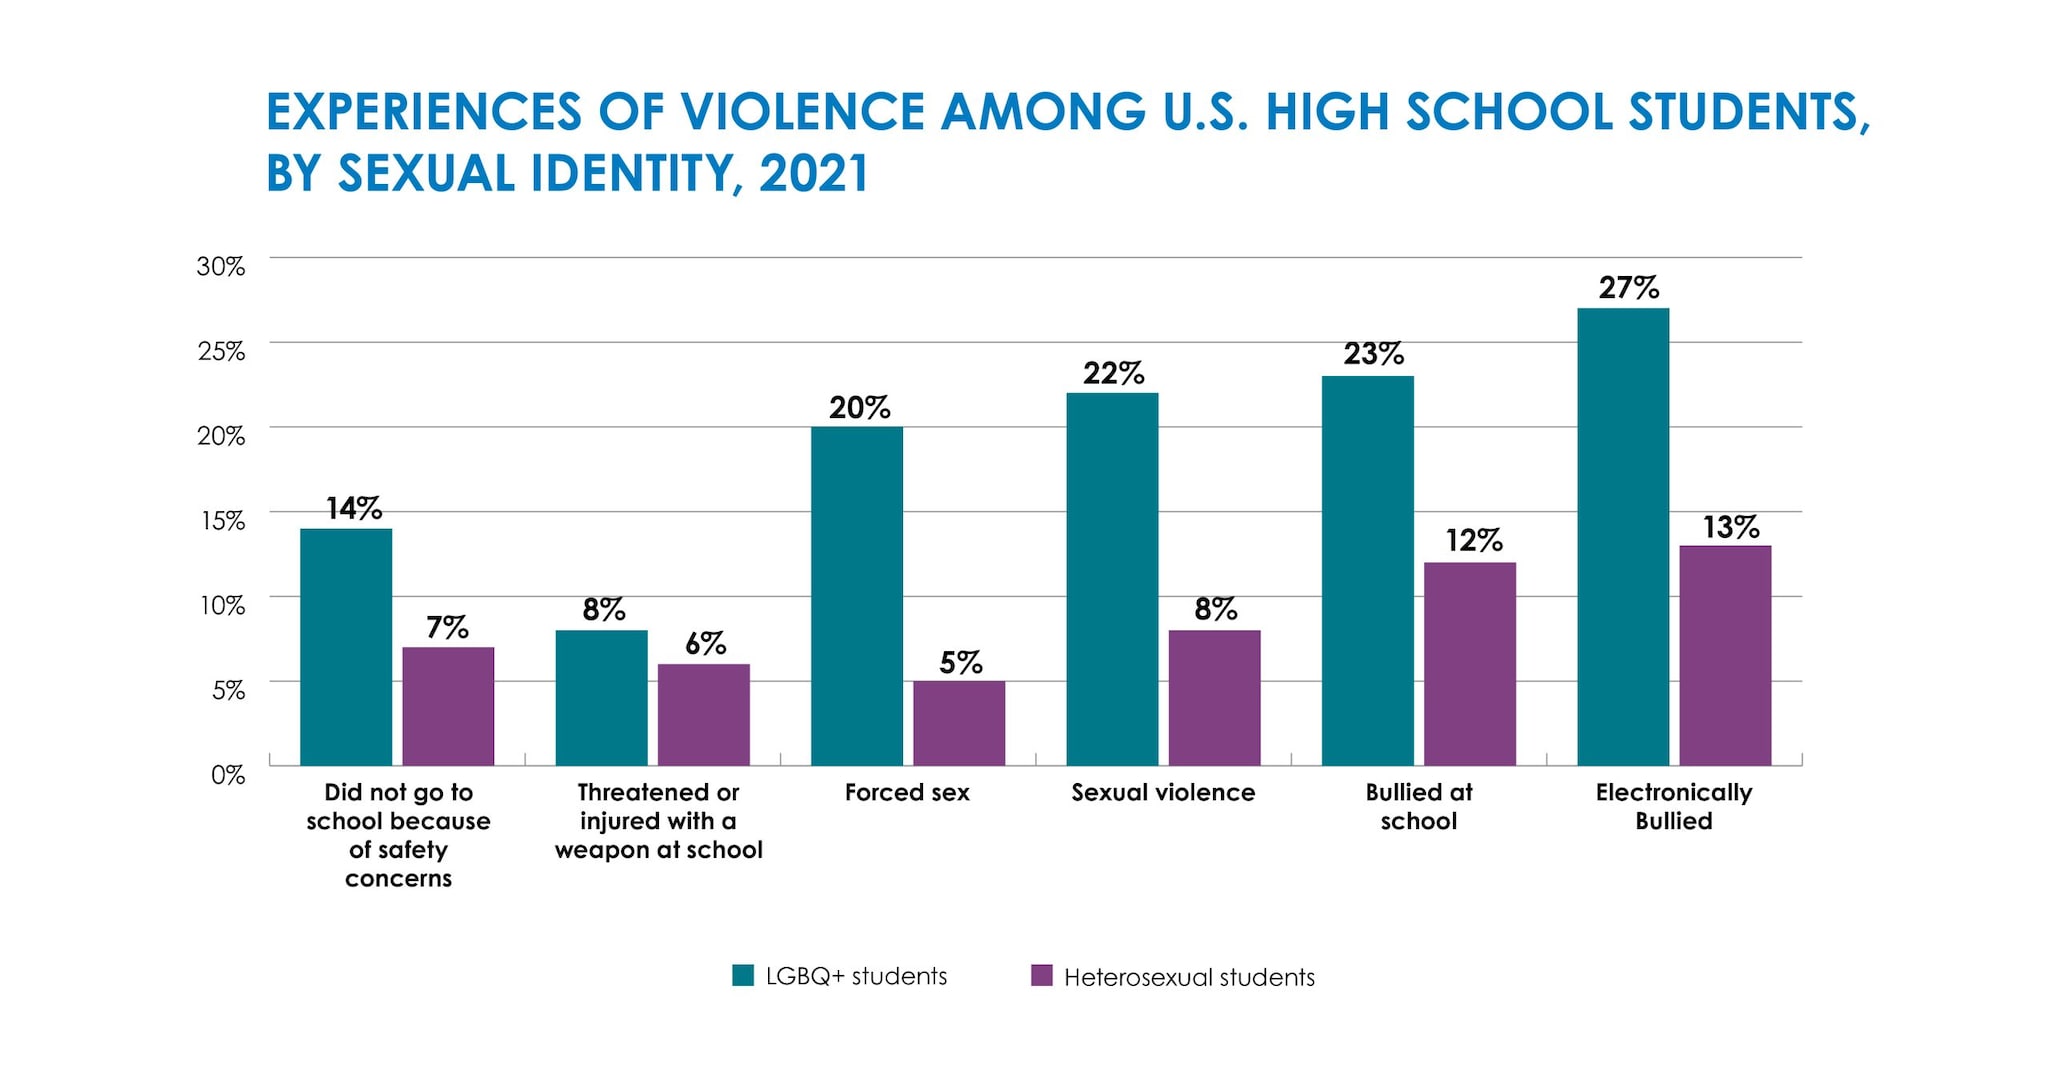 A bar chart showing 2021 U.S. student data on experiences of violence by sexual identity, with the highest levels reported among LGBQ+ students across all indicators